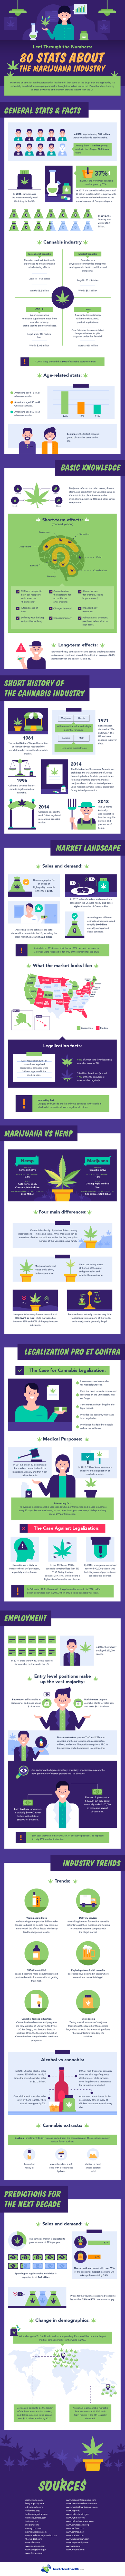 Infographic Cannabis